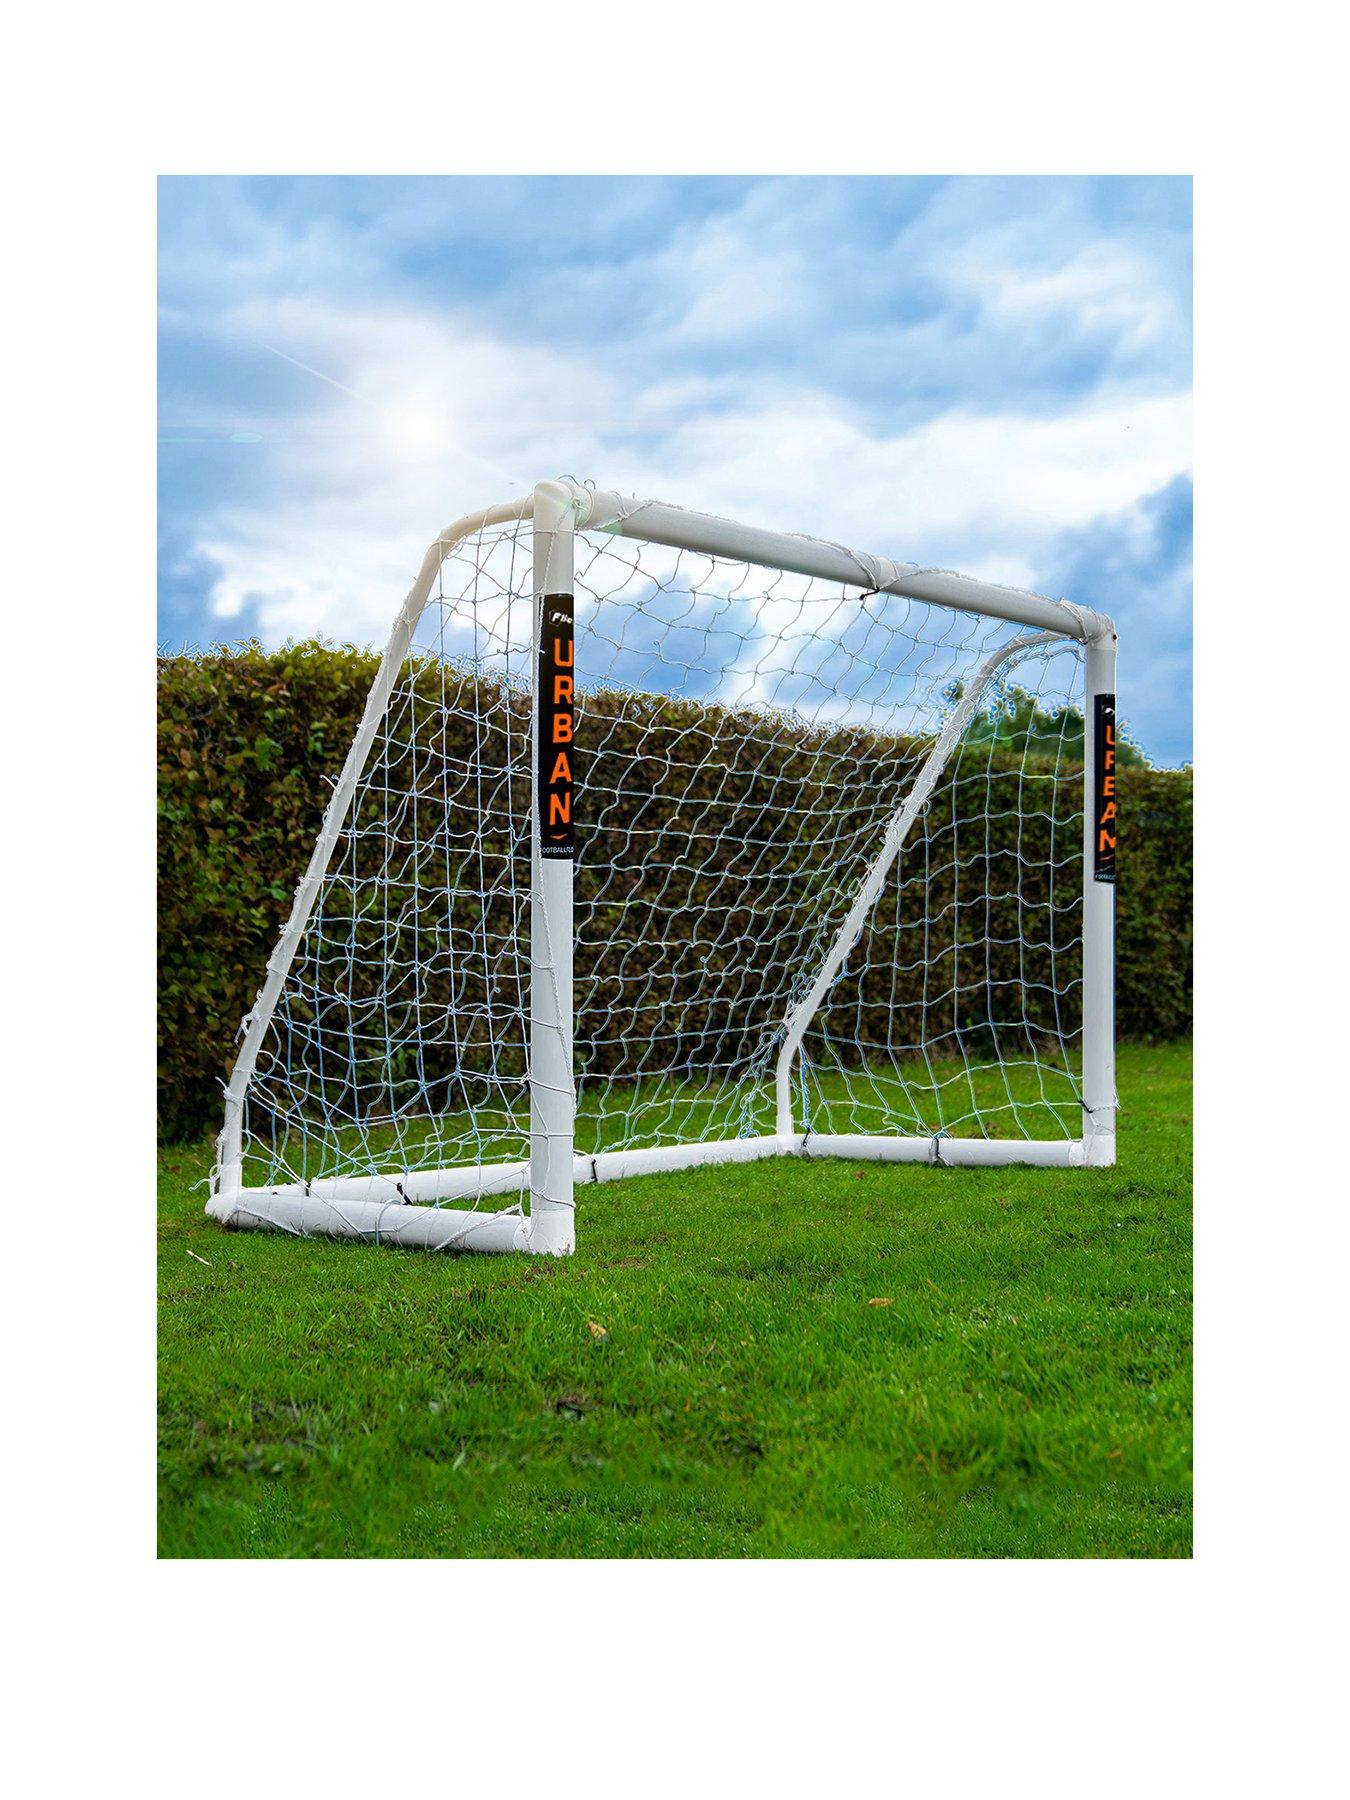 Training Grade 8x6- The Premier Locking uPVC Goal That is Perfect for Field or Home Great All Weather Goal so Leave it Out All Year Made in The UK. Samba Soccer Goal